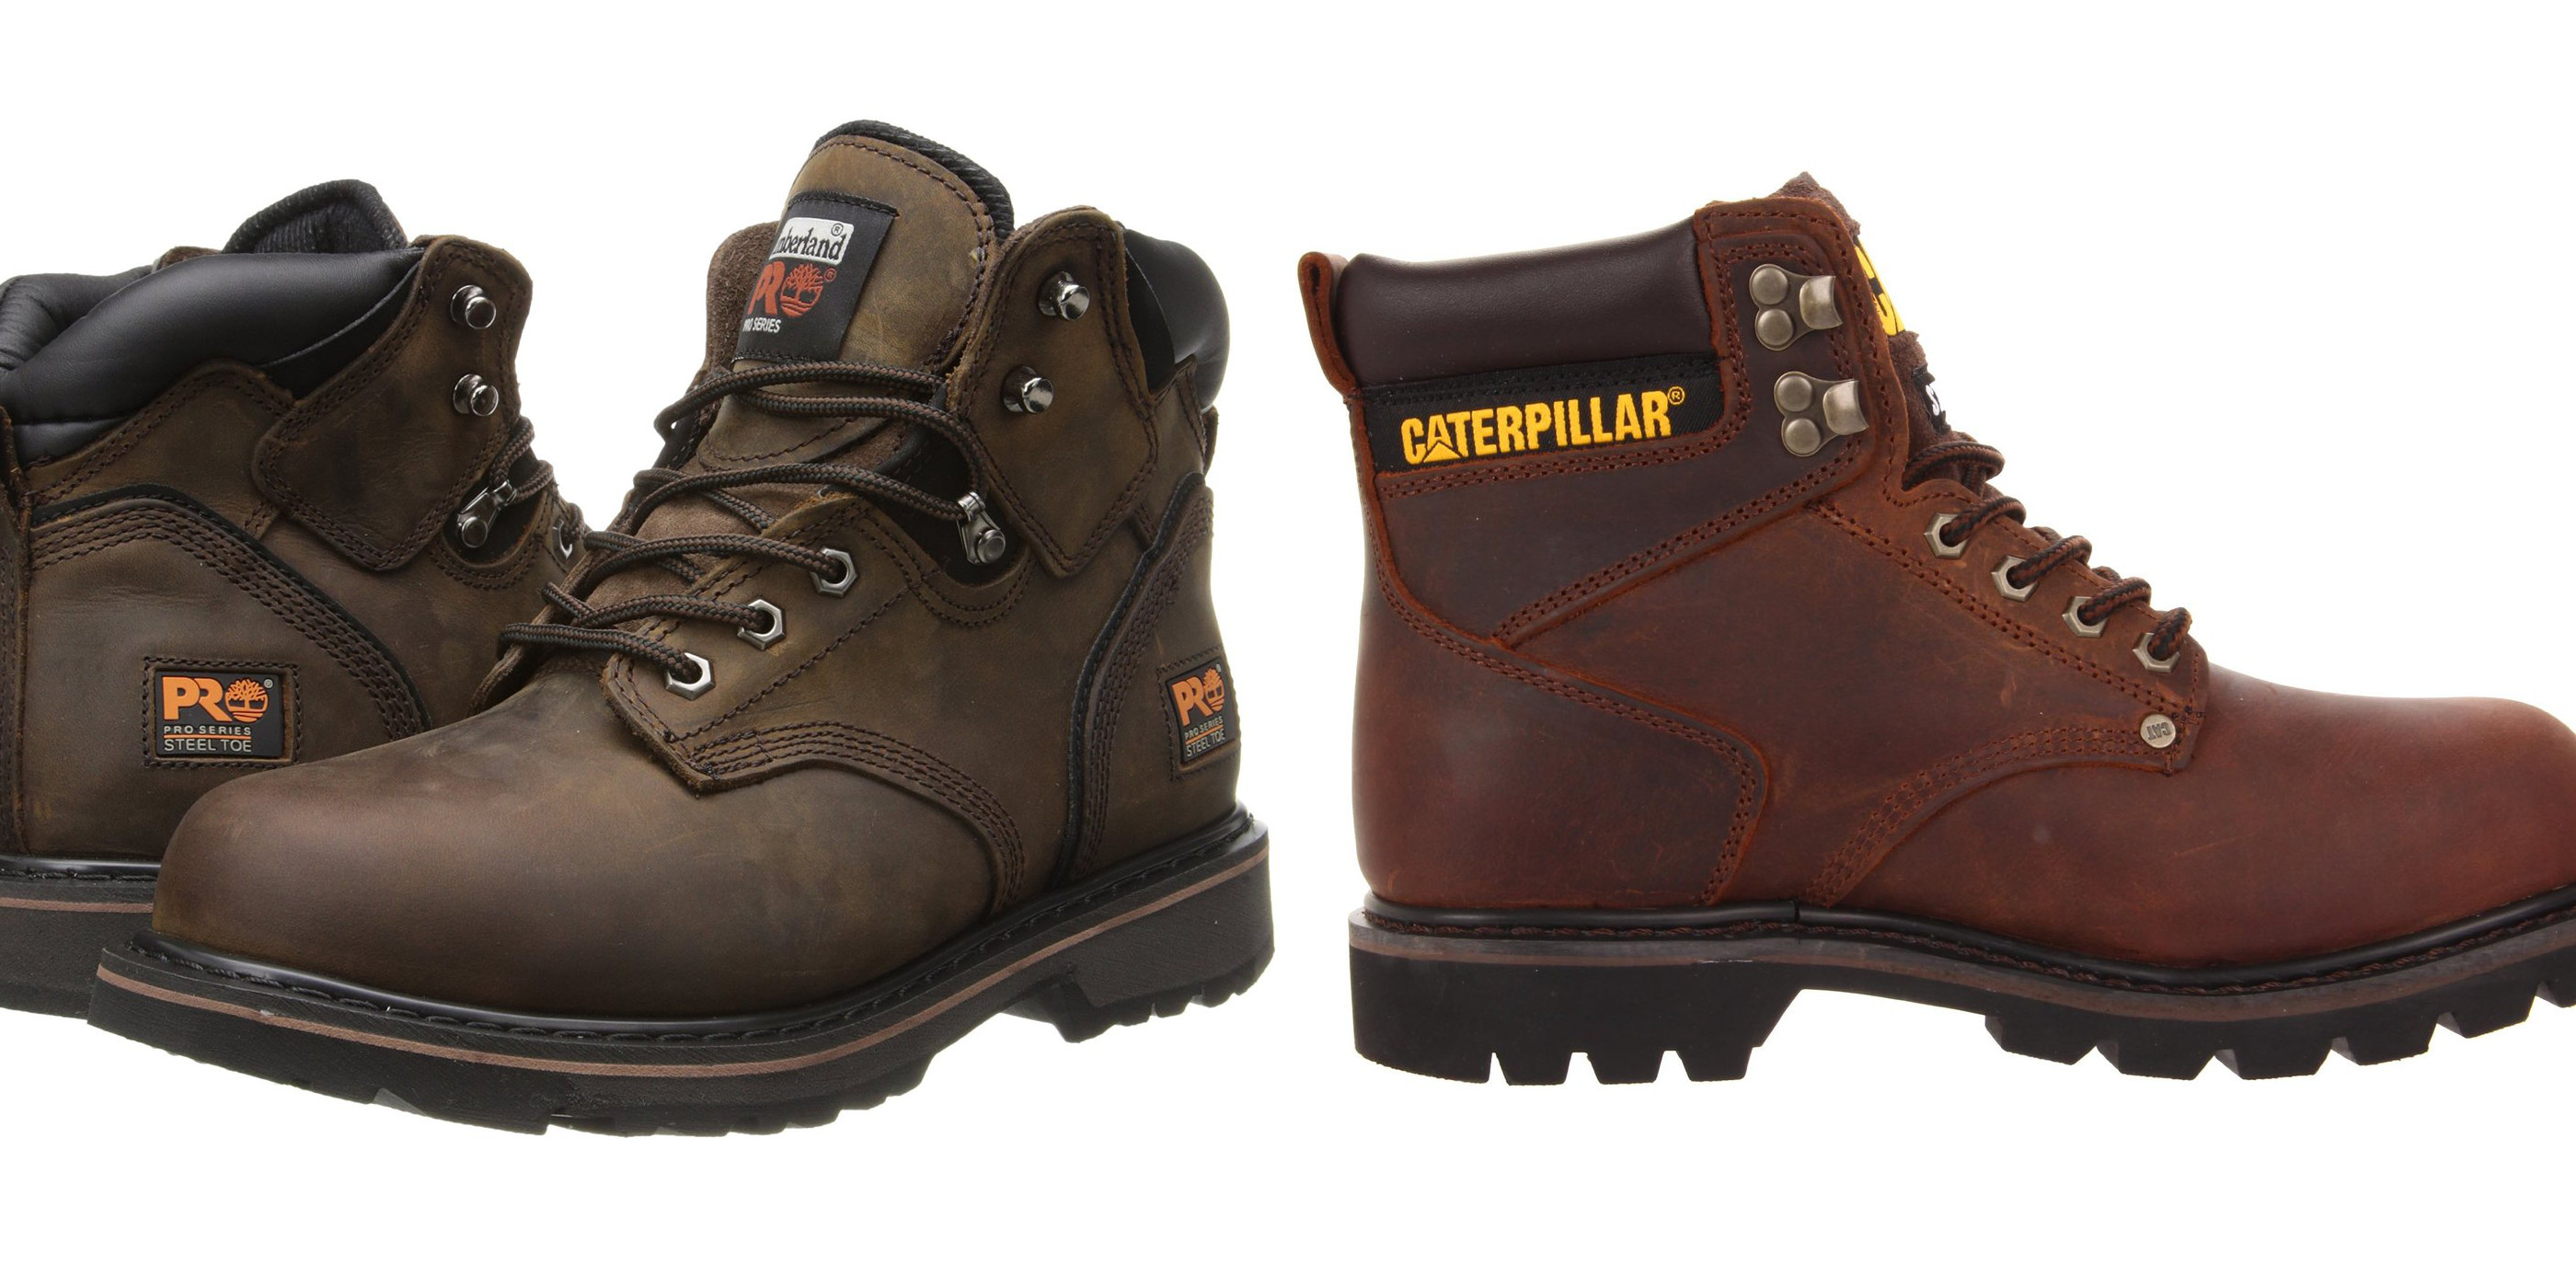 agua encender un fuego Arqueología Amazon offers up to 40% off work/safety boots & shoes from $24:  Caterpillar, Timberland, Skechers, Levi's, more